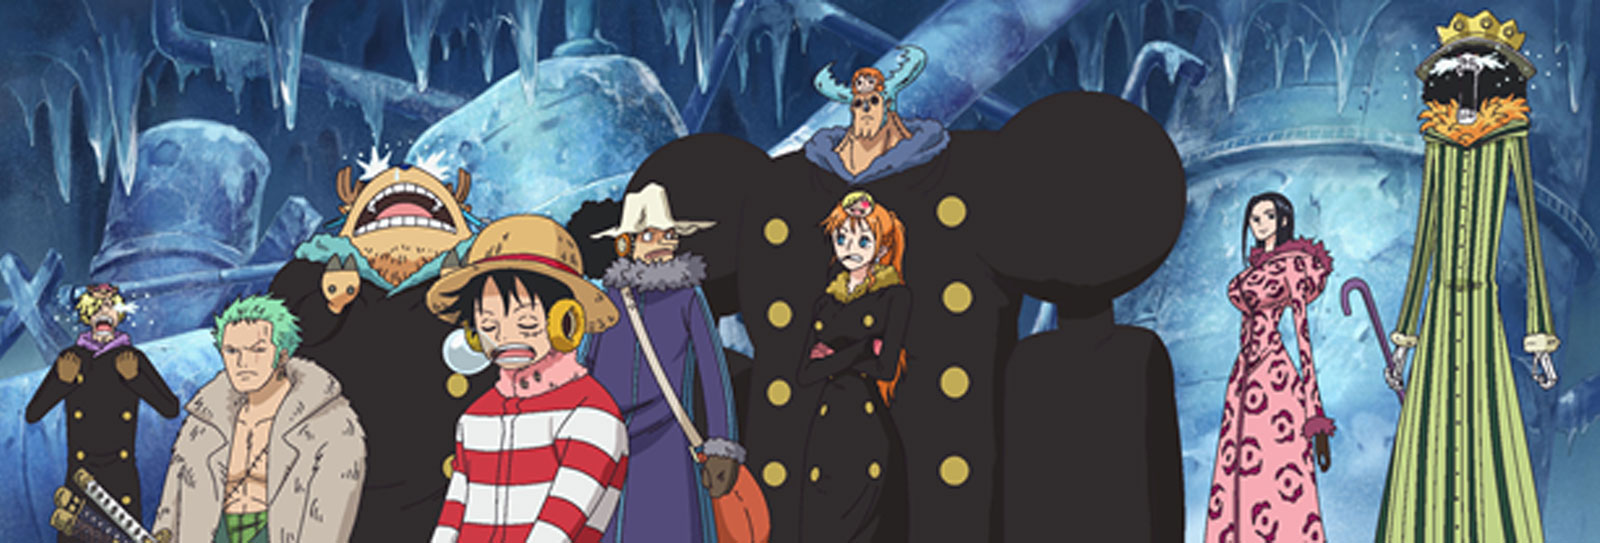 One Piece Season 14 Voyage 8 English-Dubbed Episodes Coming Soon (Plus  Anime Guide)